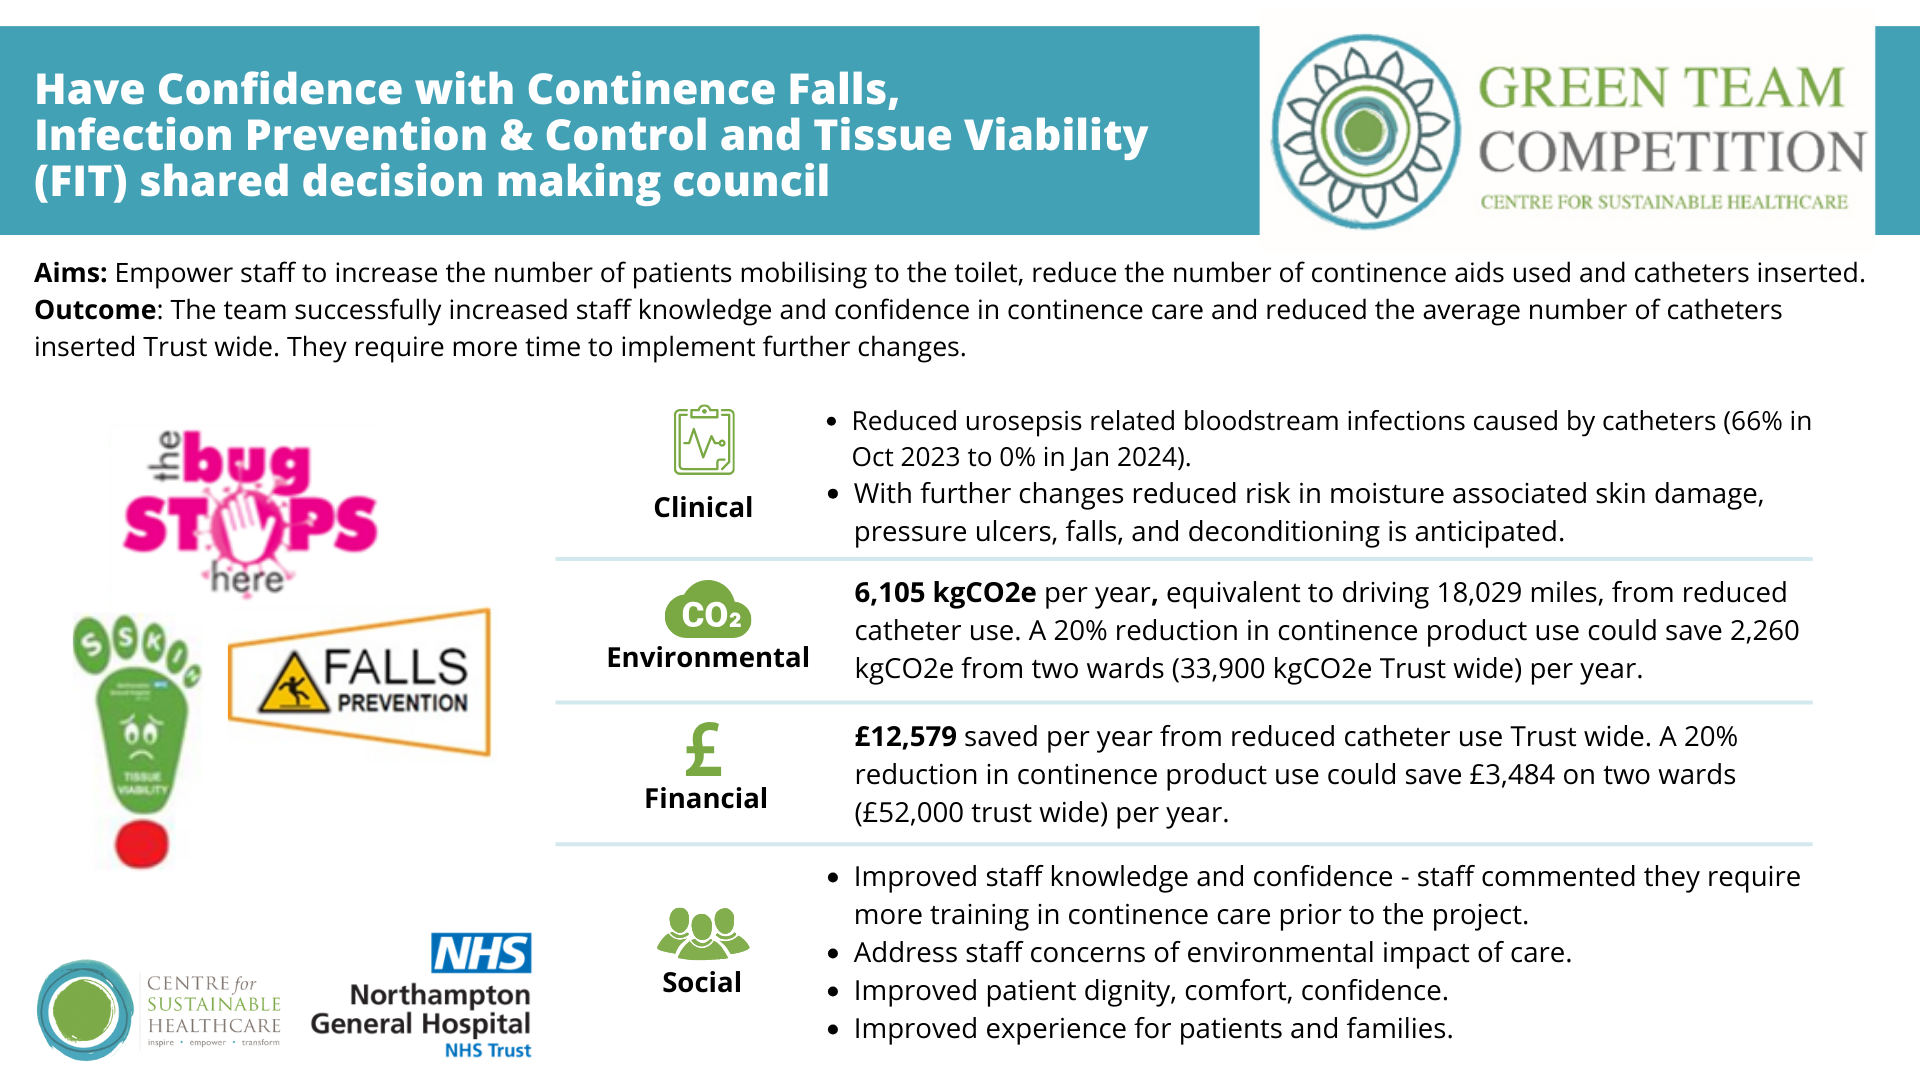 Northampton General Hospital NHS Trust Green Team Competition 2023-24 Project Have Confidence with Continence, Falls, Infection Prevention & Control and Tissue Viability (FIT) shared decision making council